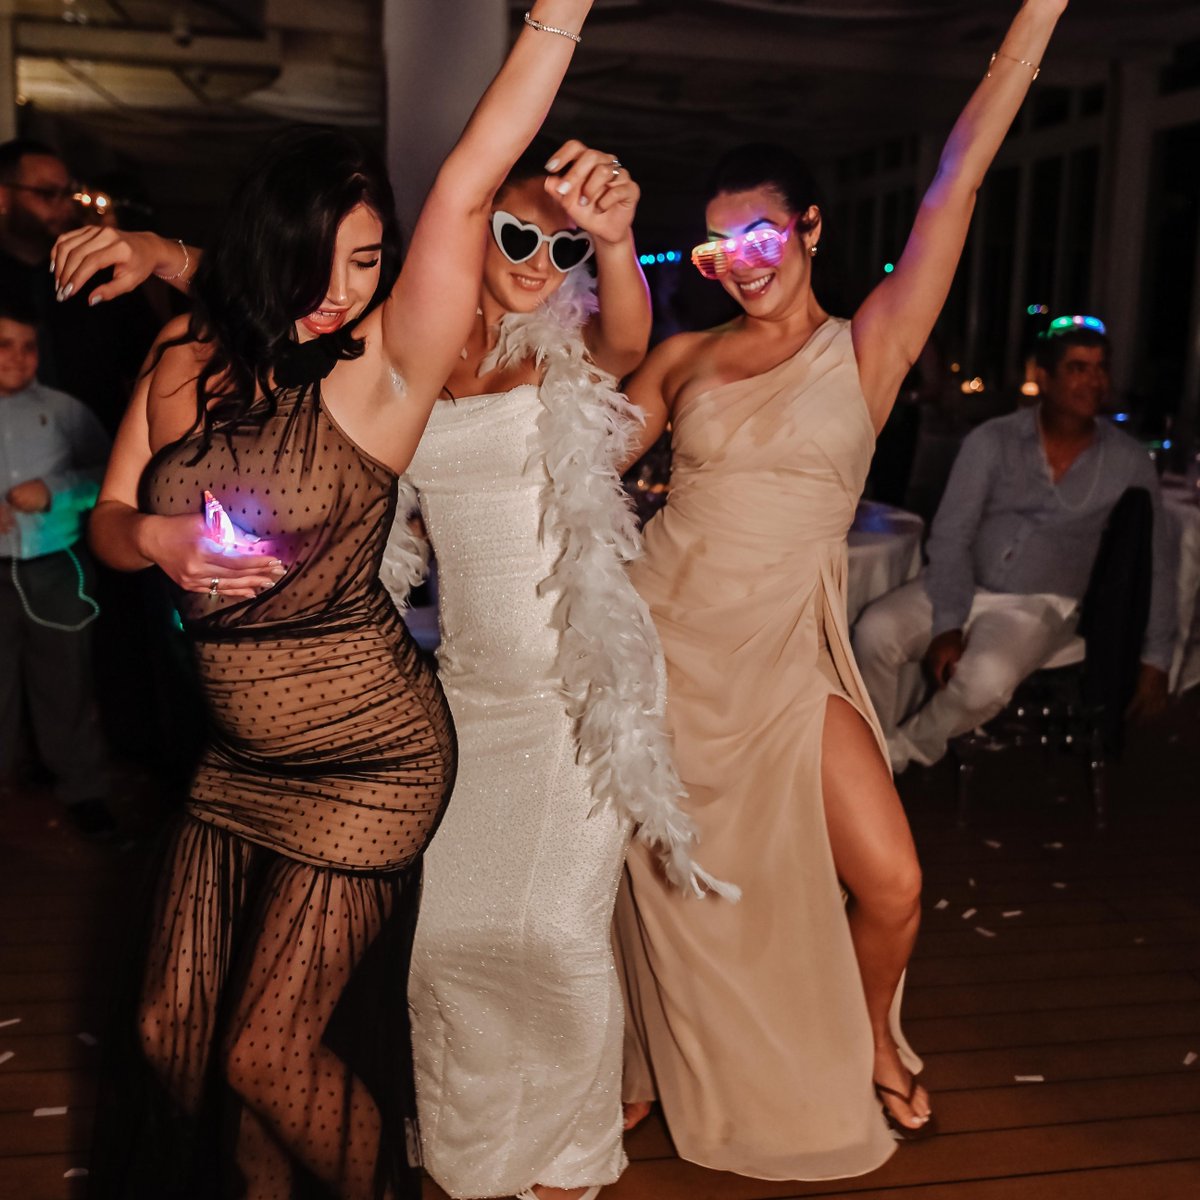 Dance like everyone’s watching! Celebrate your big day with epic moves and unforgettable moments. Book your wedding with us, where love and laughter go hand in hand!💍🎉 bit.ly/44xHwwI

photo credit: S.J.C Photography (Sarah Curtis)